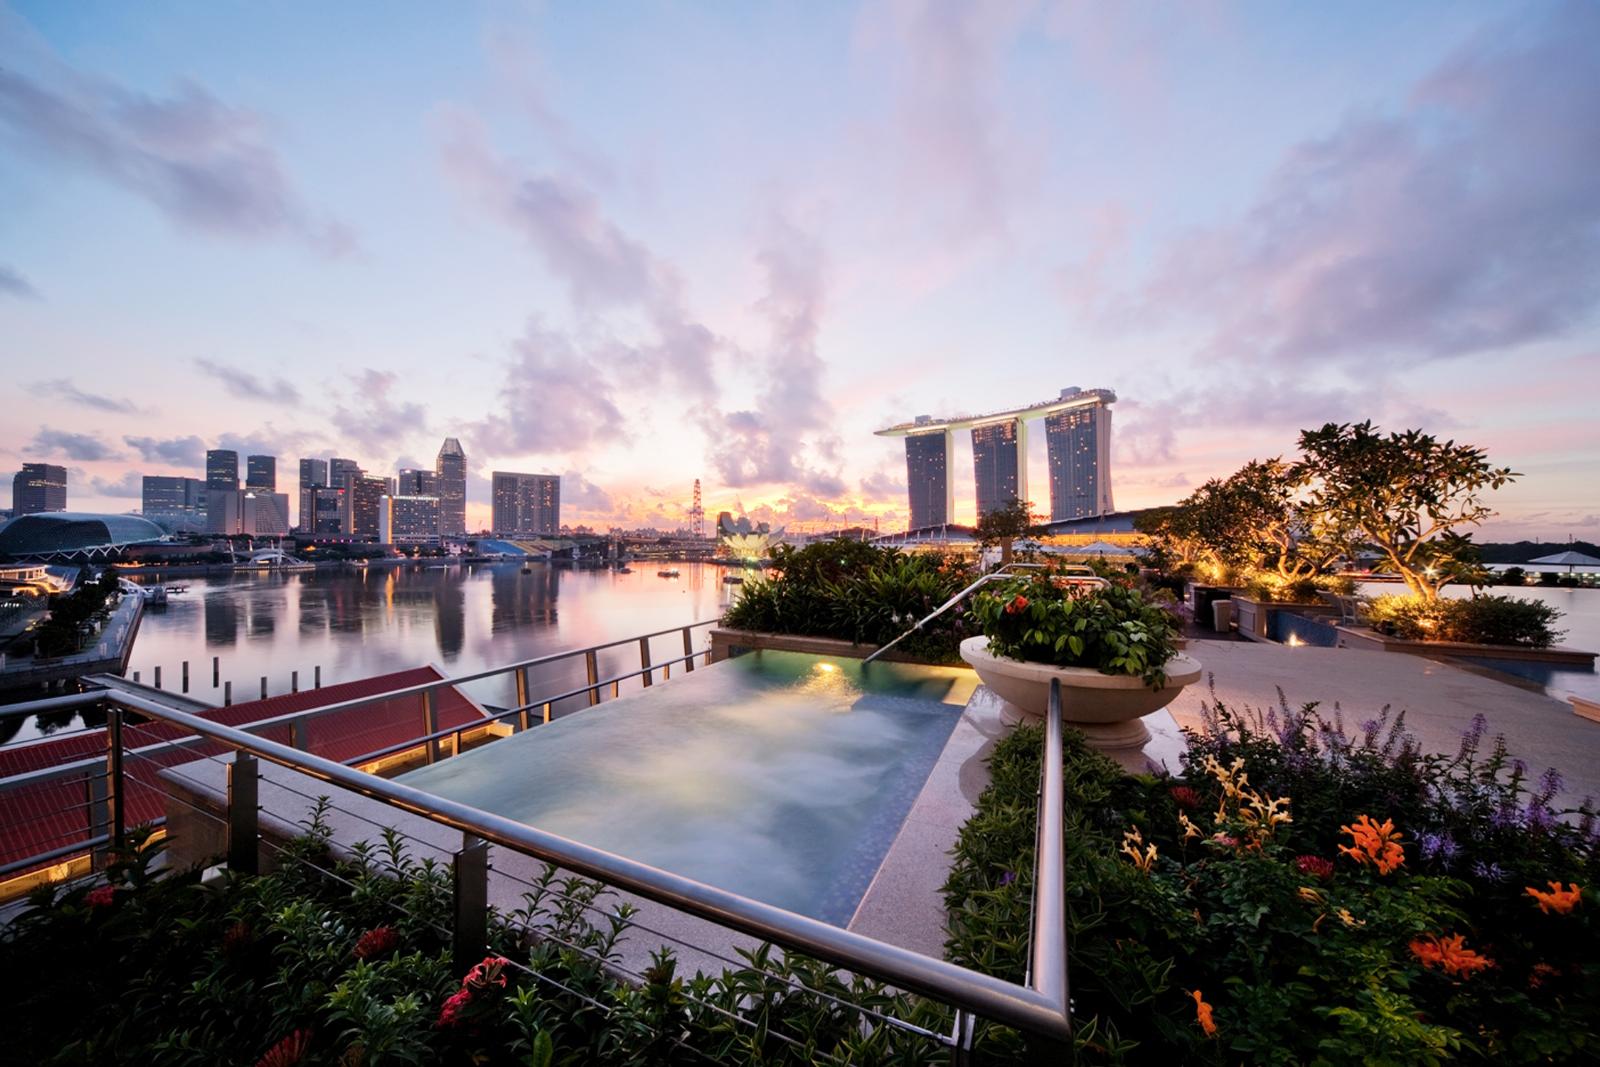 Jacuzzi on the roof - The Fullerton Bay